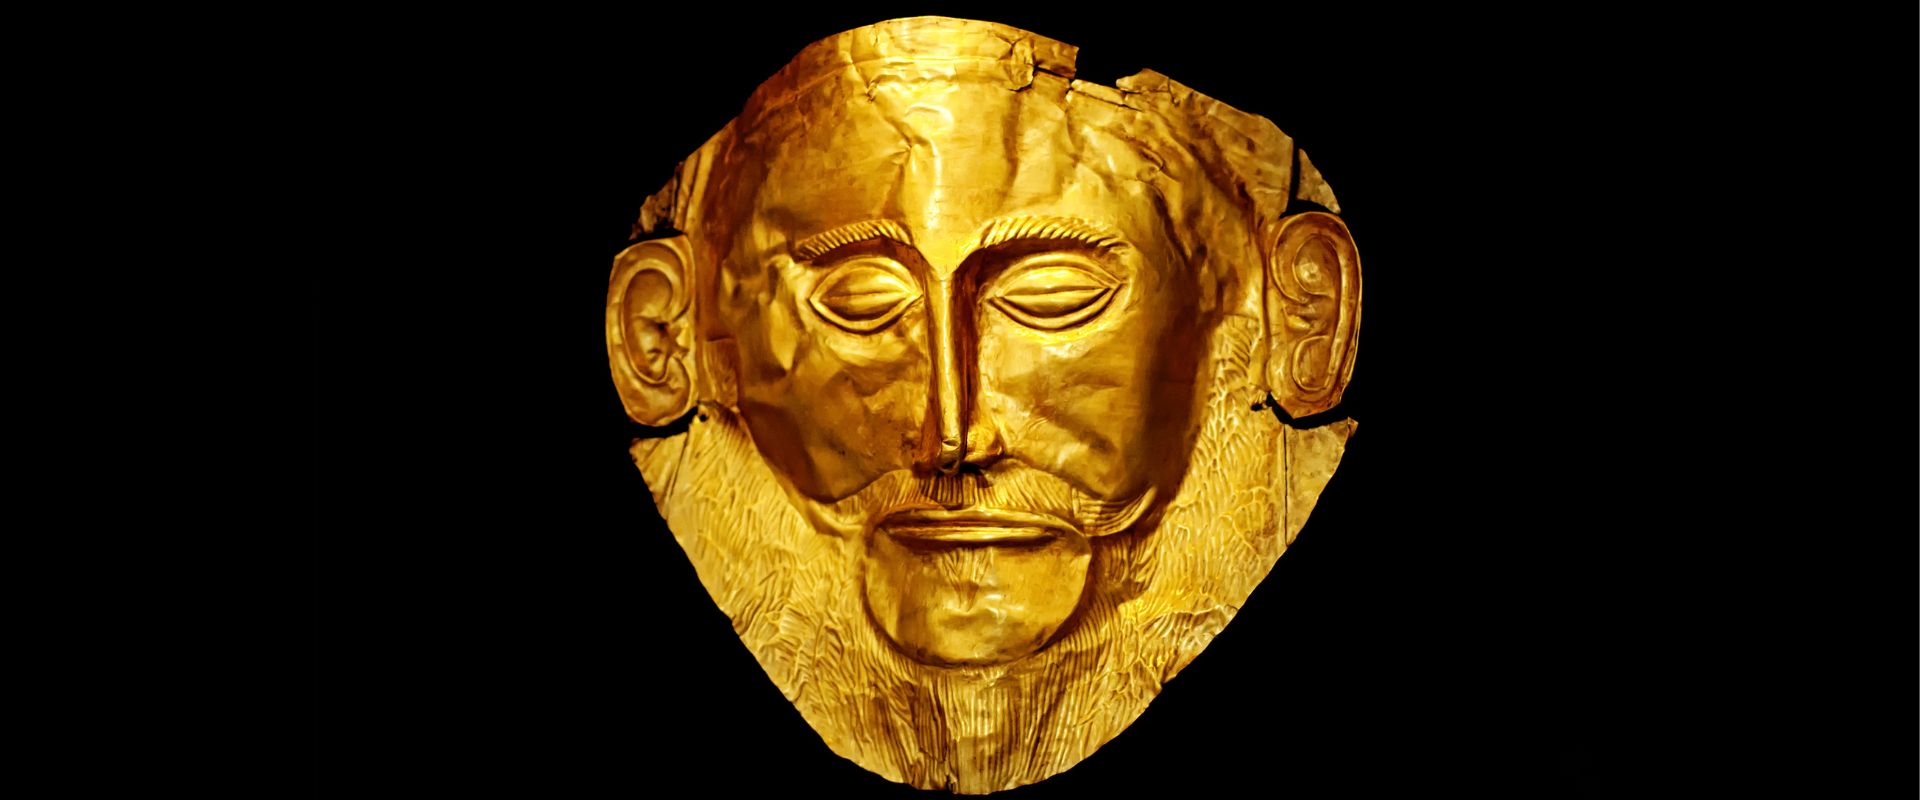 the golden Death Mask of Agamemnon